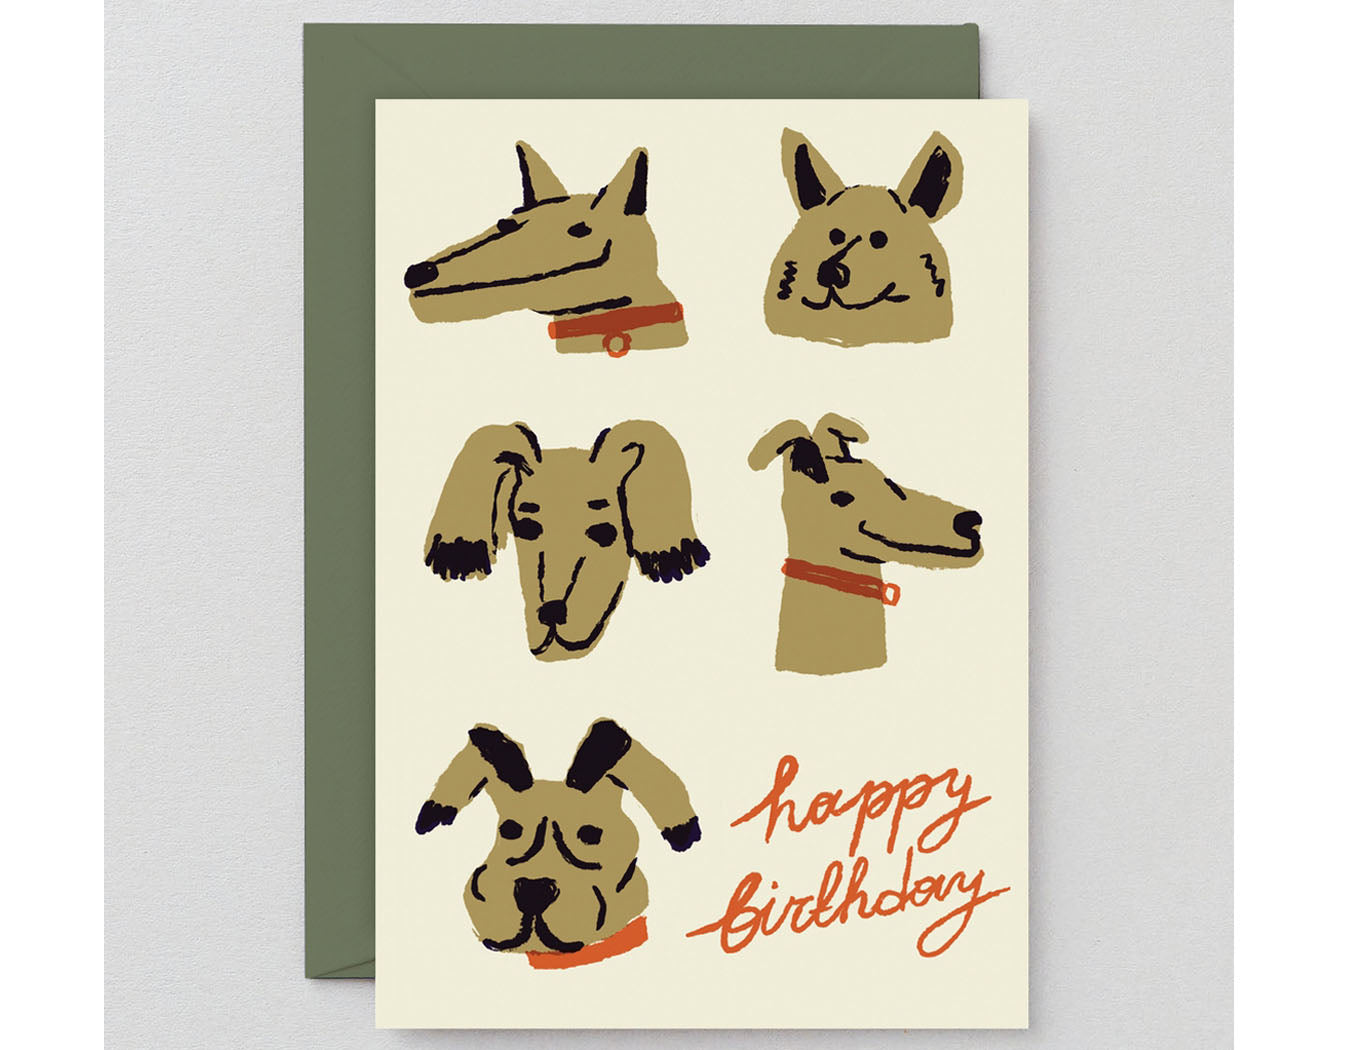 illustrated dog faces text reads happy birthday